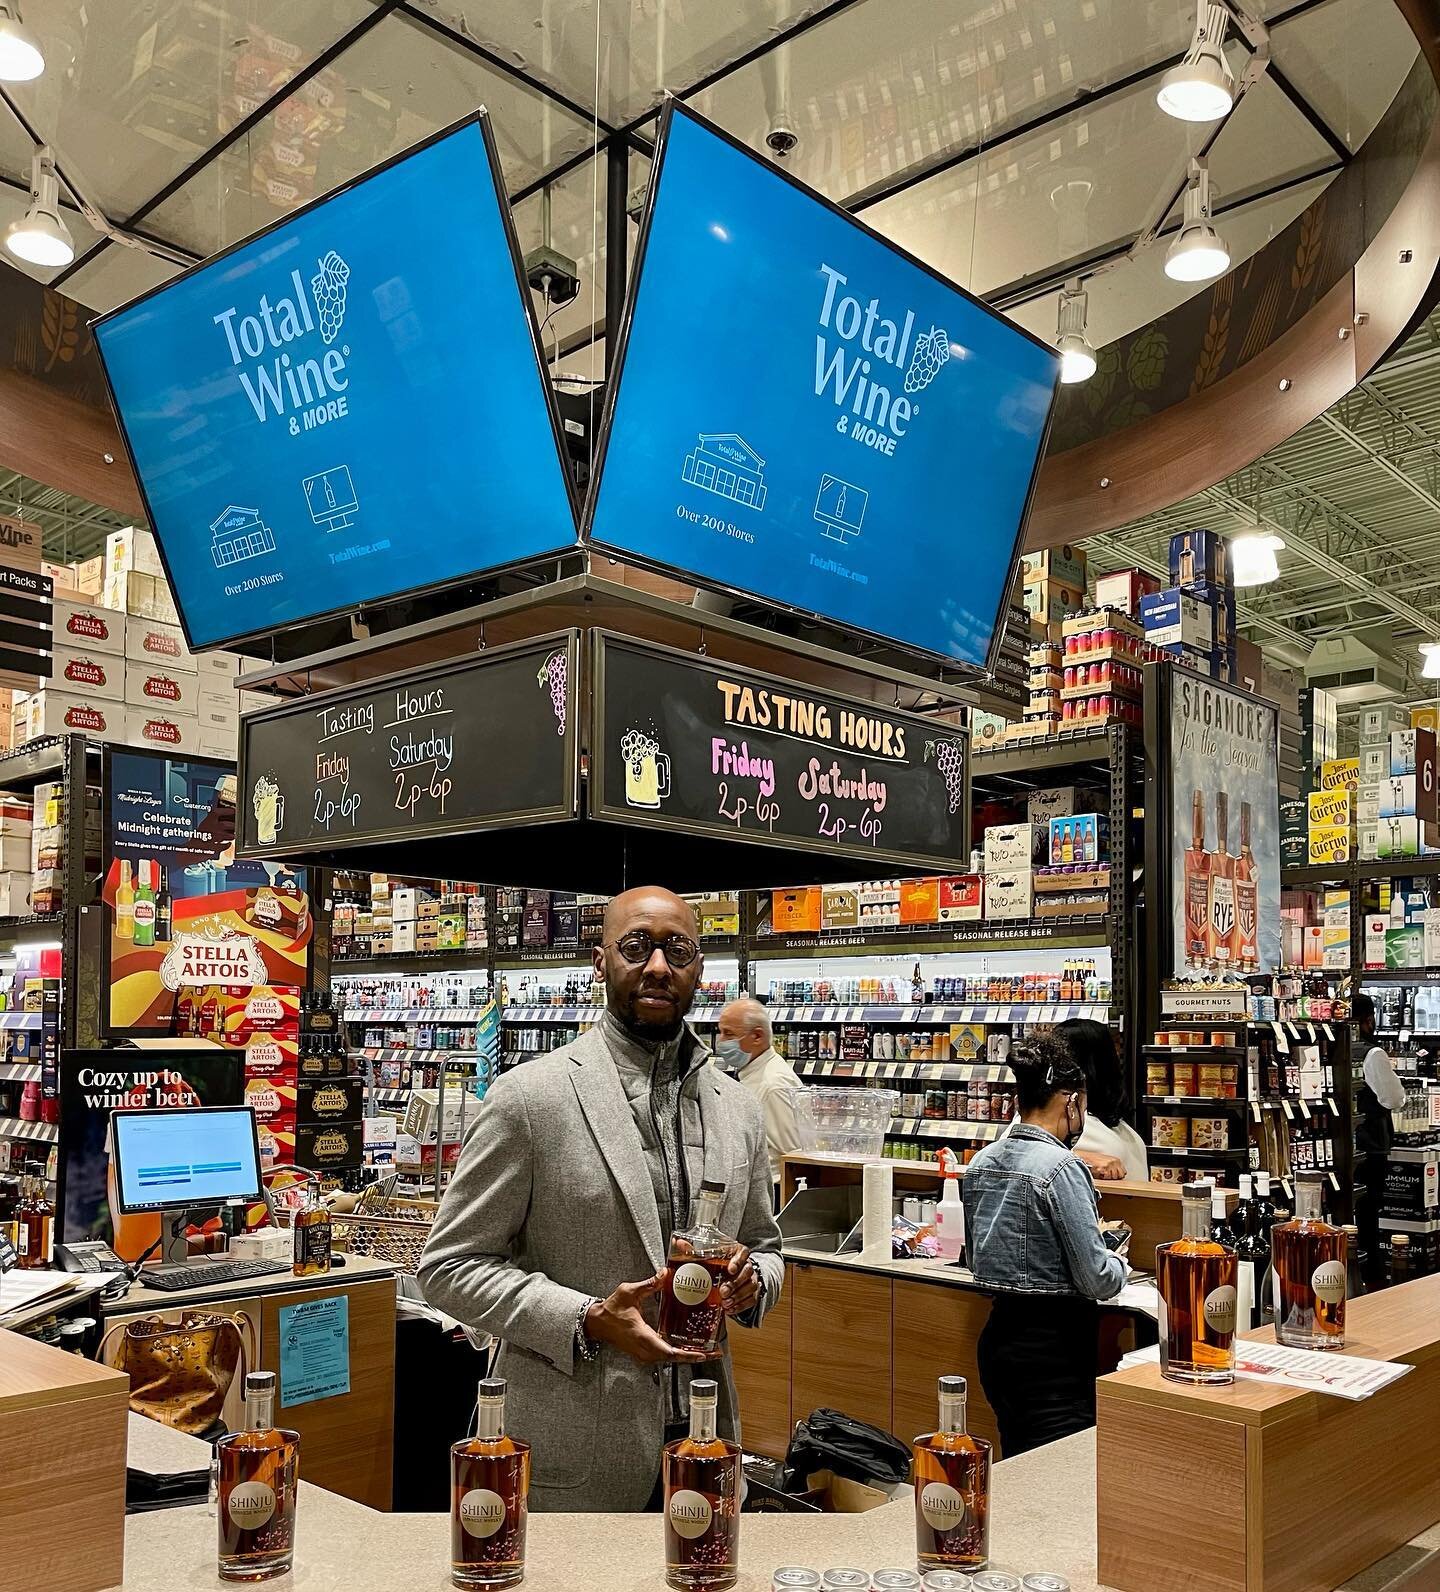 This #CyberMonday purchase the perfect stocking stuffer online at Total Wine &amp; More, Drizzly, Reserve Bar and more online retailers. 🥃📲

Co-Founder &amp; COO, Janon Costley poses for the camera after selling 3 cases of Shinju at a tasting event